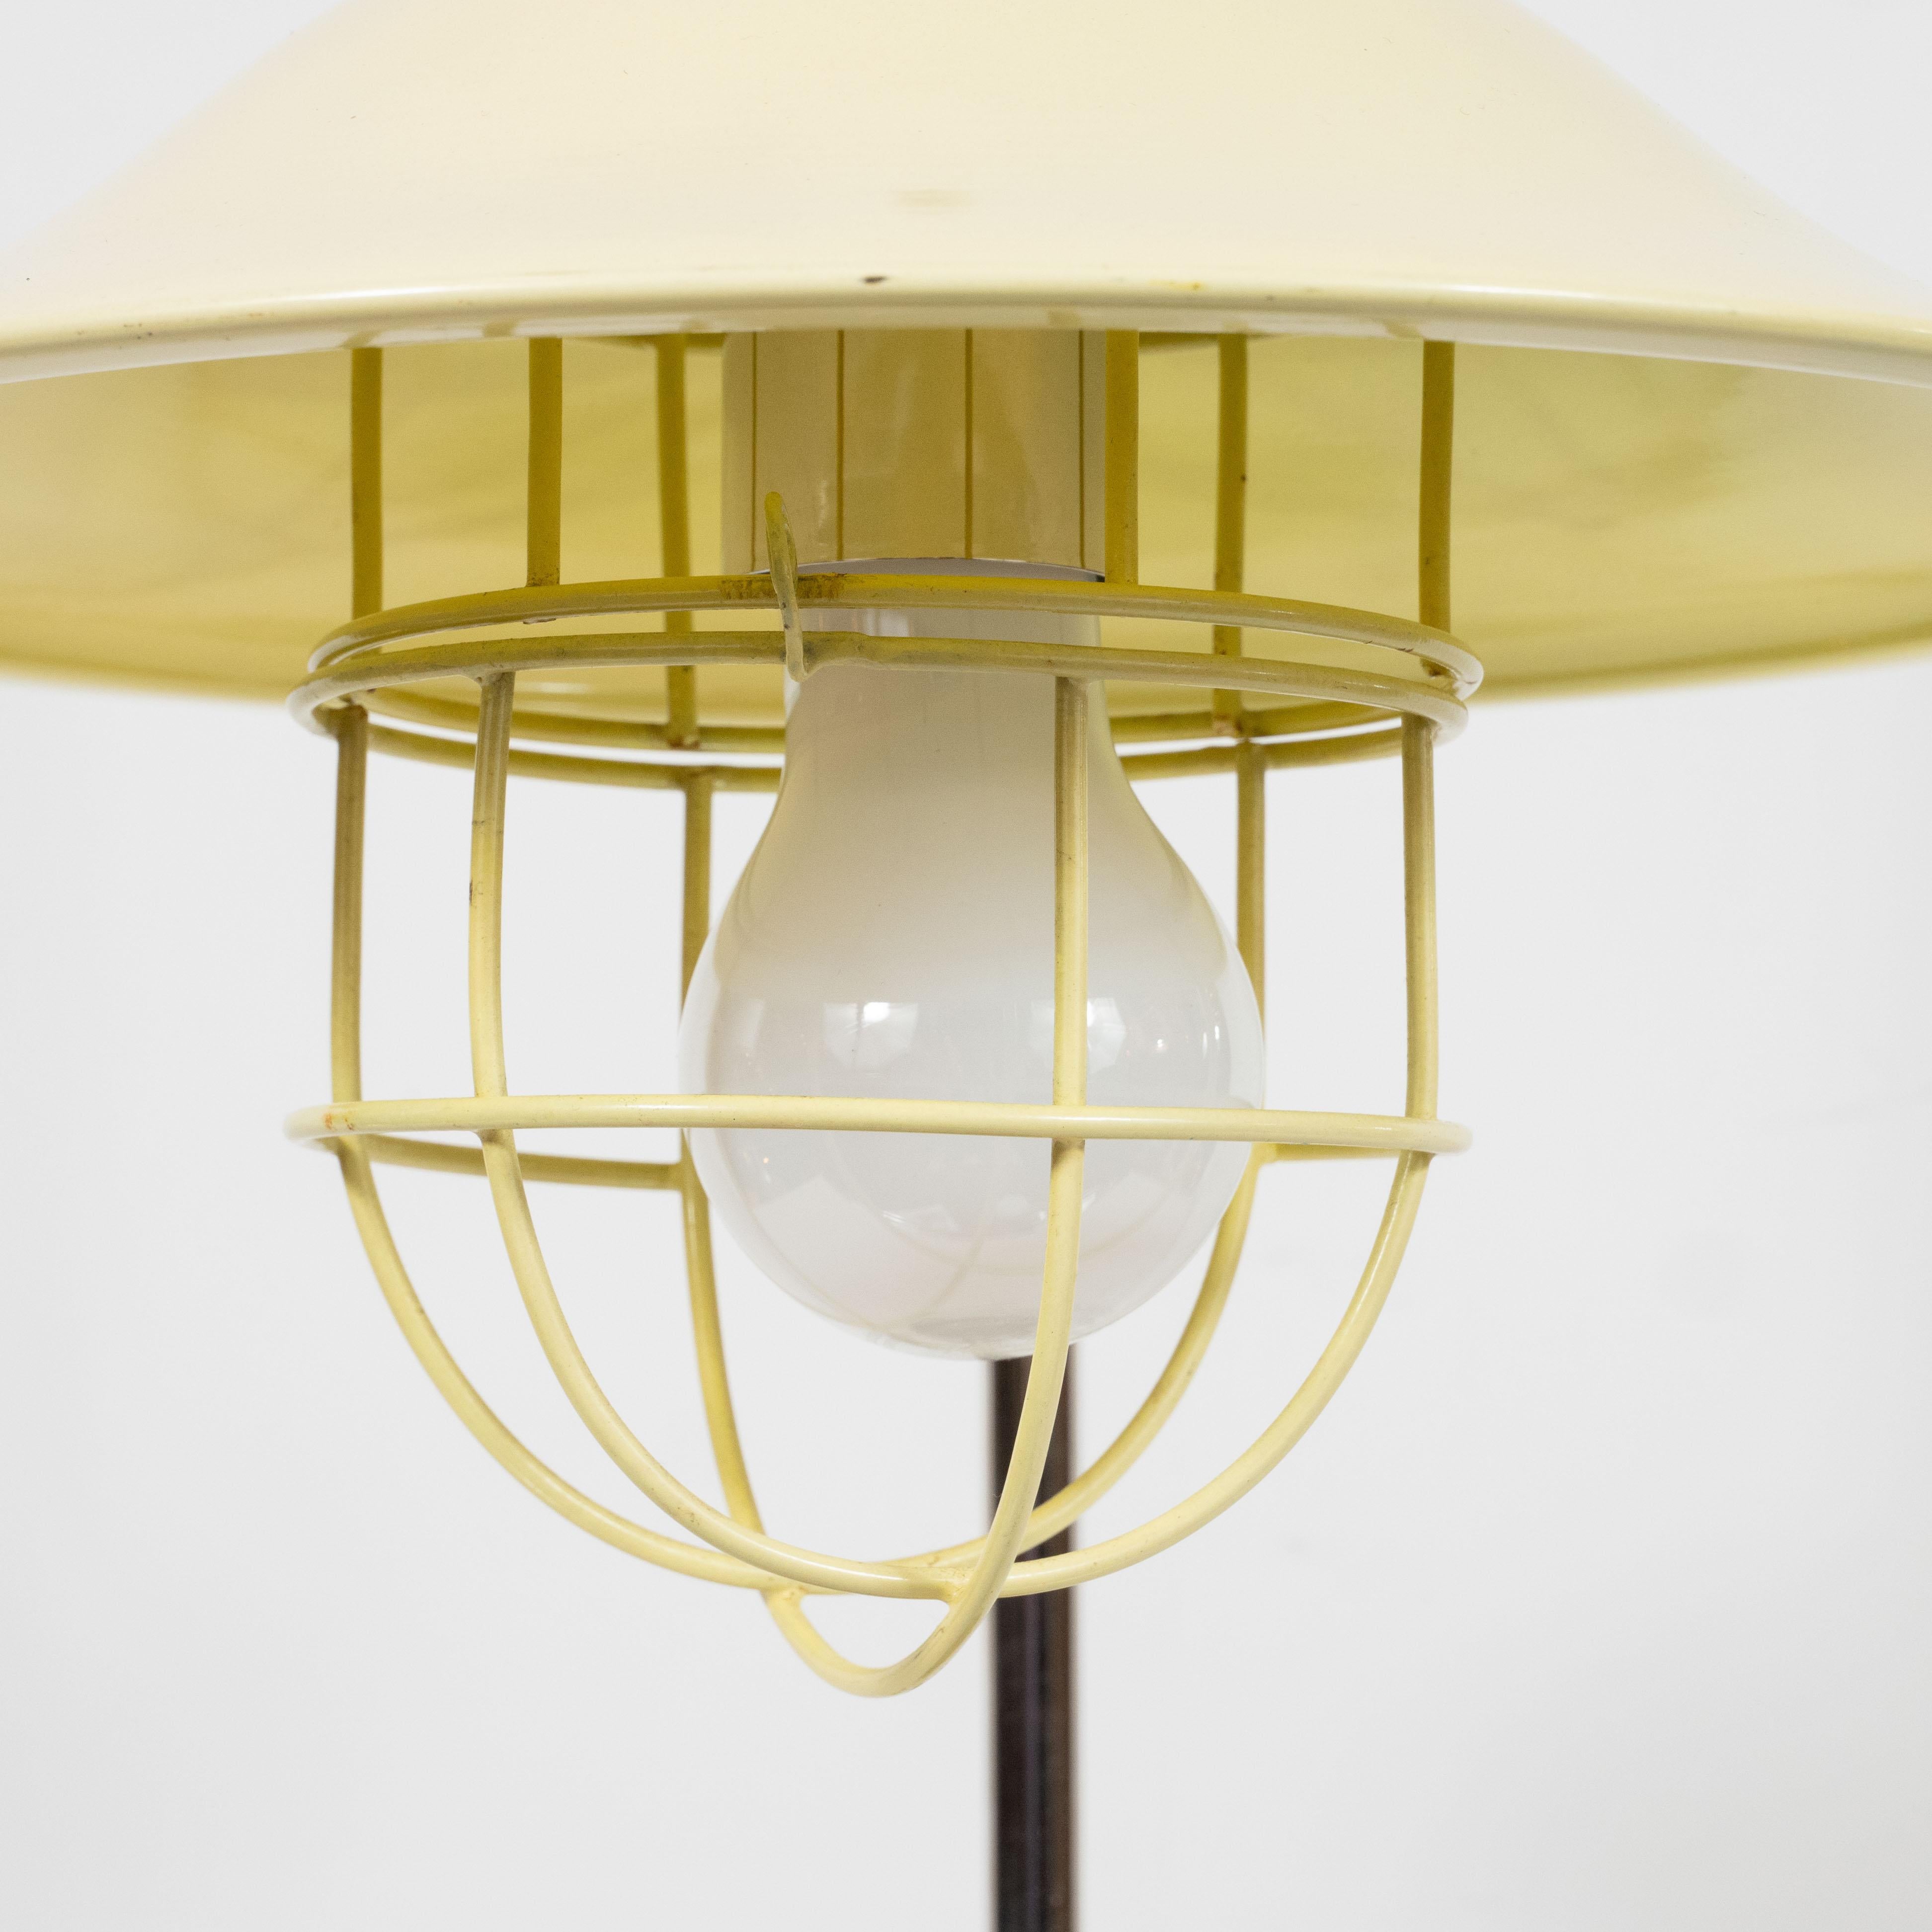 French Mid-Century Modern Chrome and Lemon Cream and Black Enamel Table Lamp For Sale 2